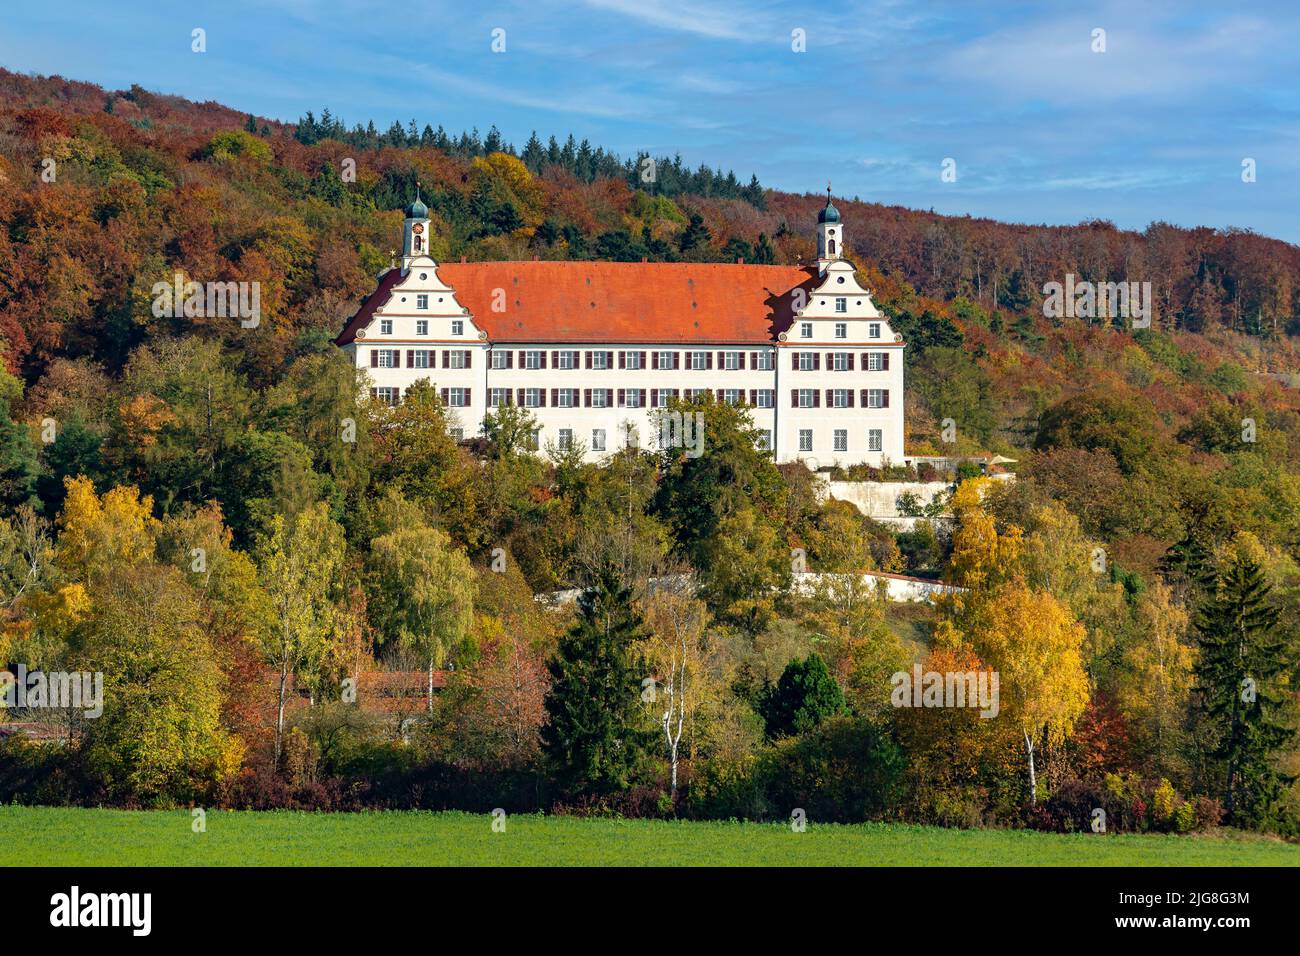 The three-winged Mochental Castle, which was built in the Renaissance style, is located near the large district town of Ehingen in the Kirchener Valley on the southern edge of the Swabian Alb. Stock Photo